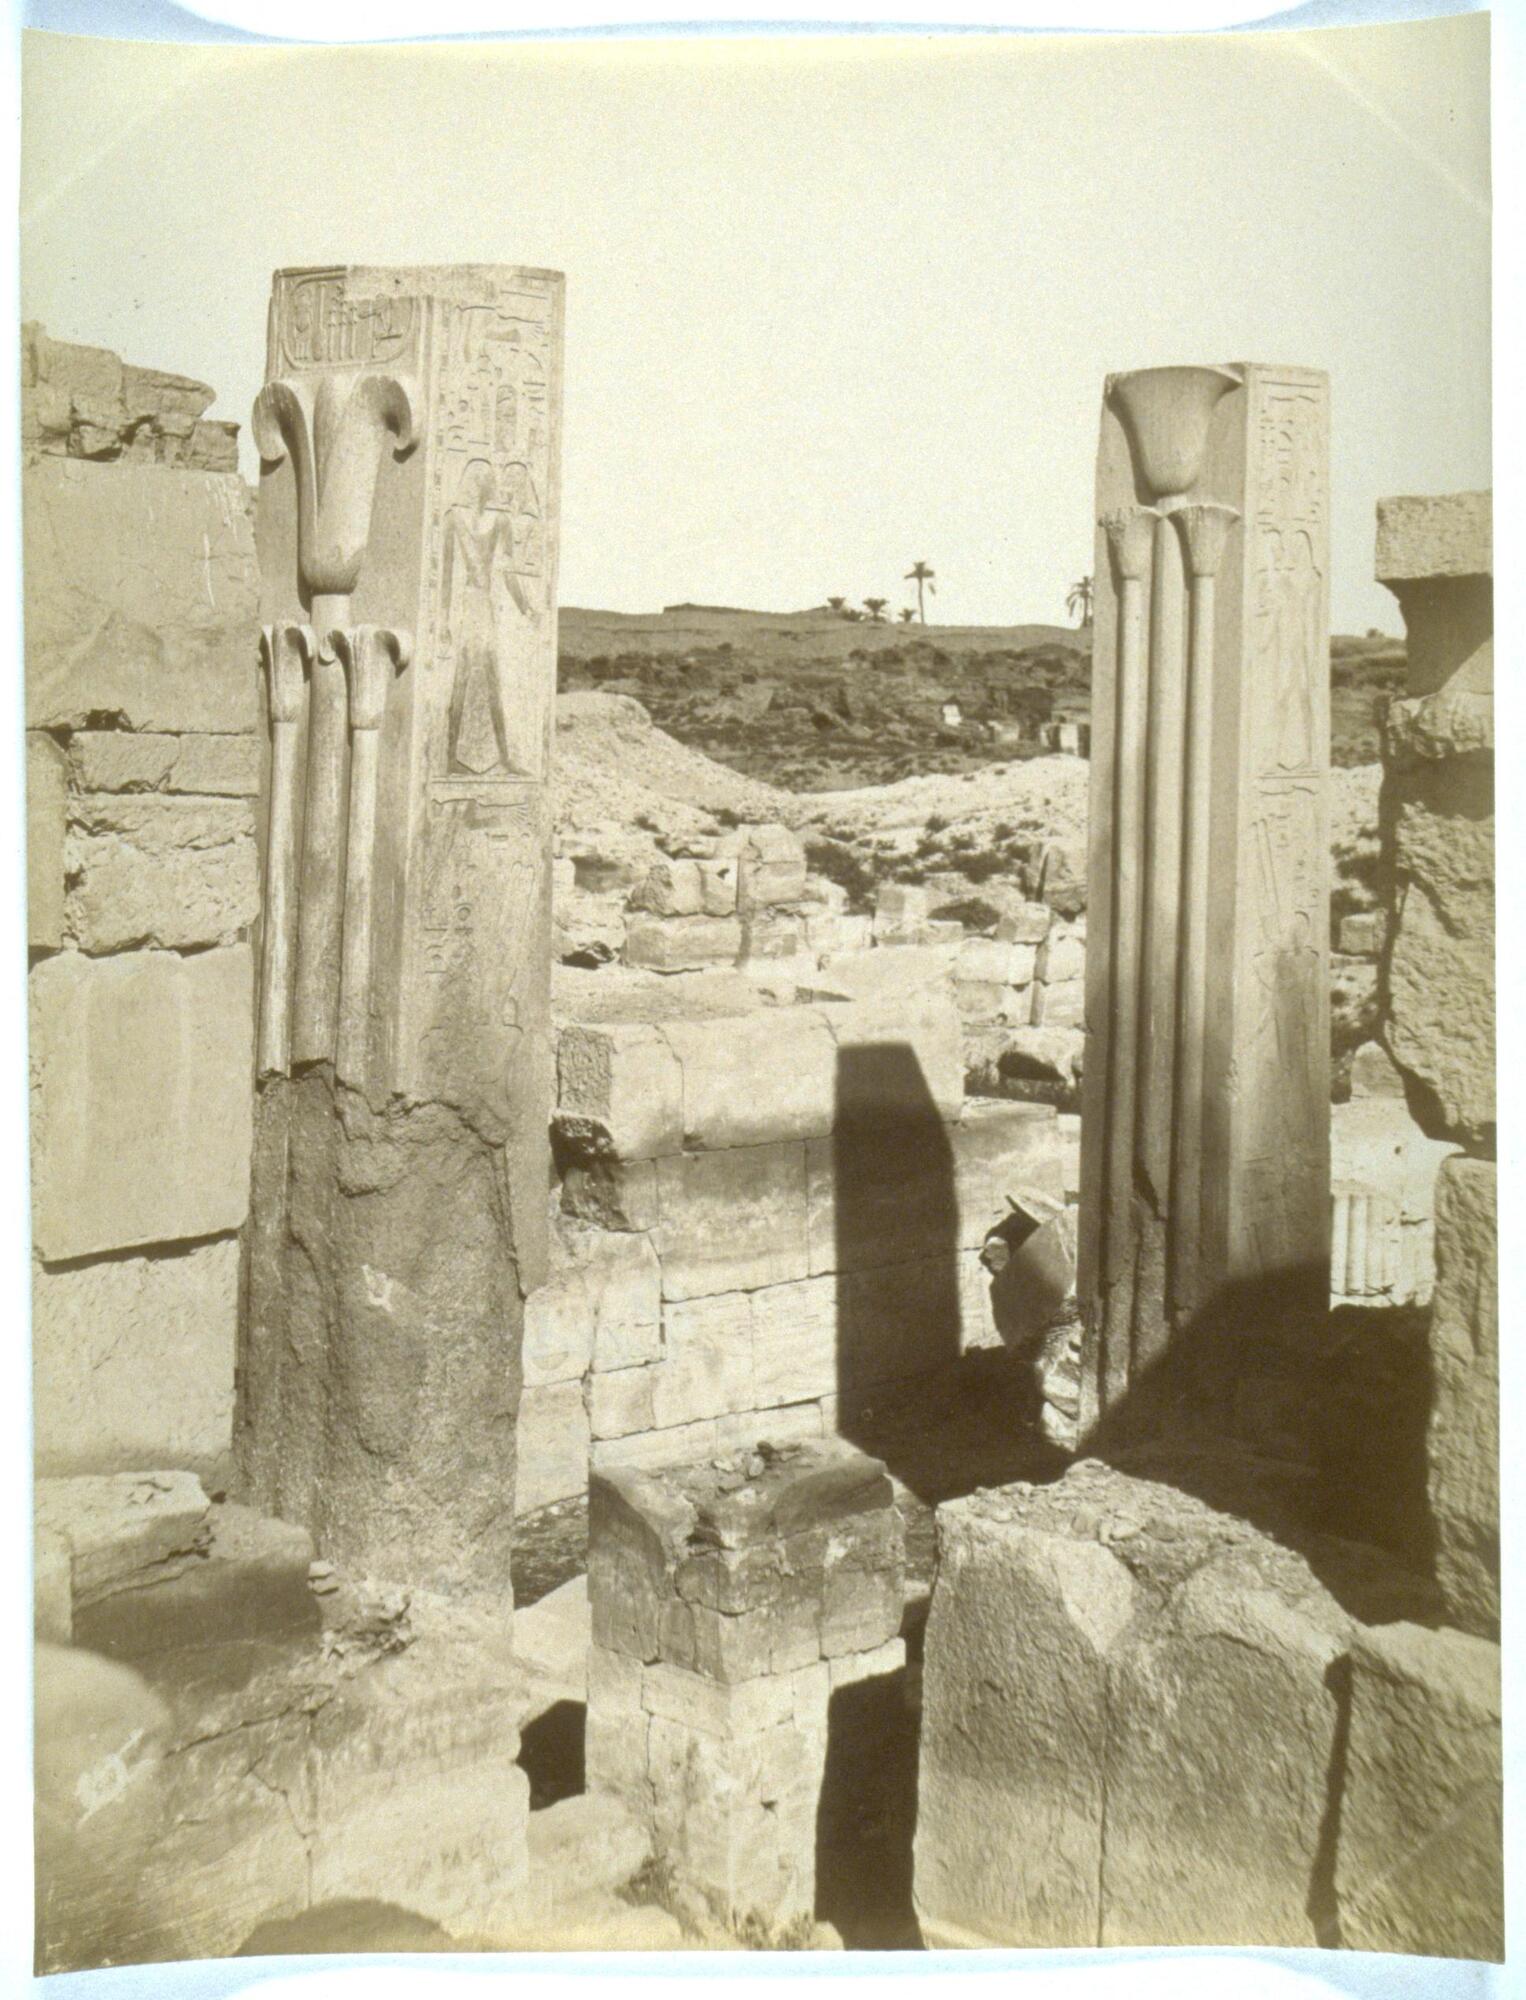 This photograph depicts a view of some ancient stone ruins. Two columns stand in the center of the photograph, each bearing relief designs and carved hieroglyphics.